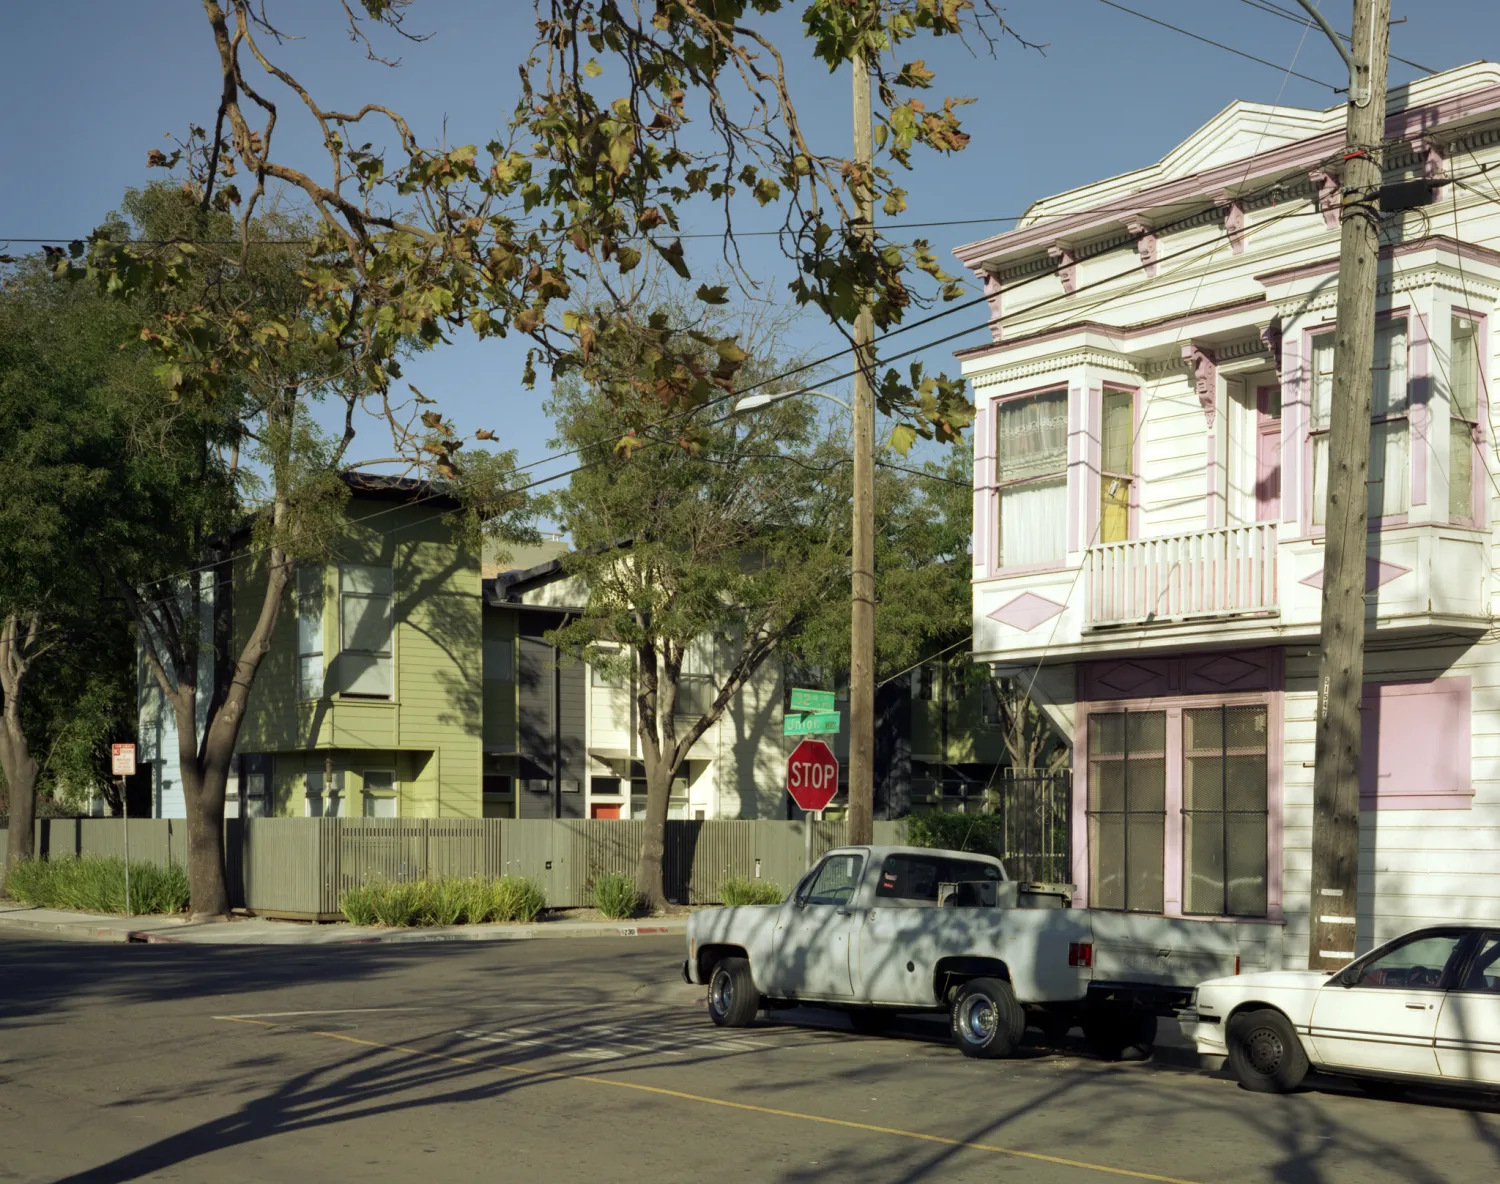 The historic neighborhood at Magnolia Row in West Oakland, California.